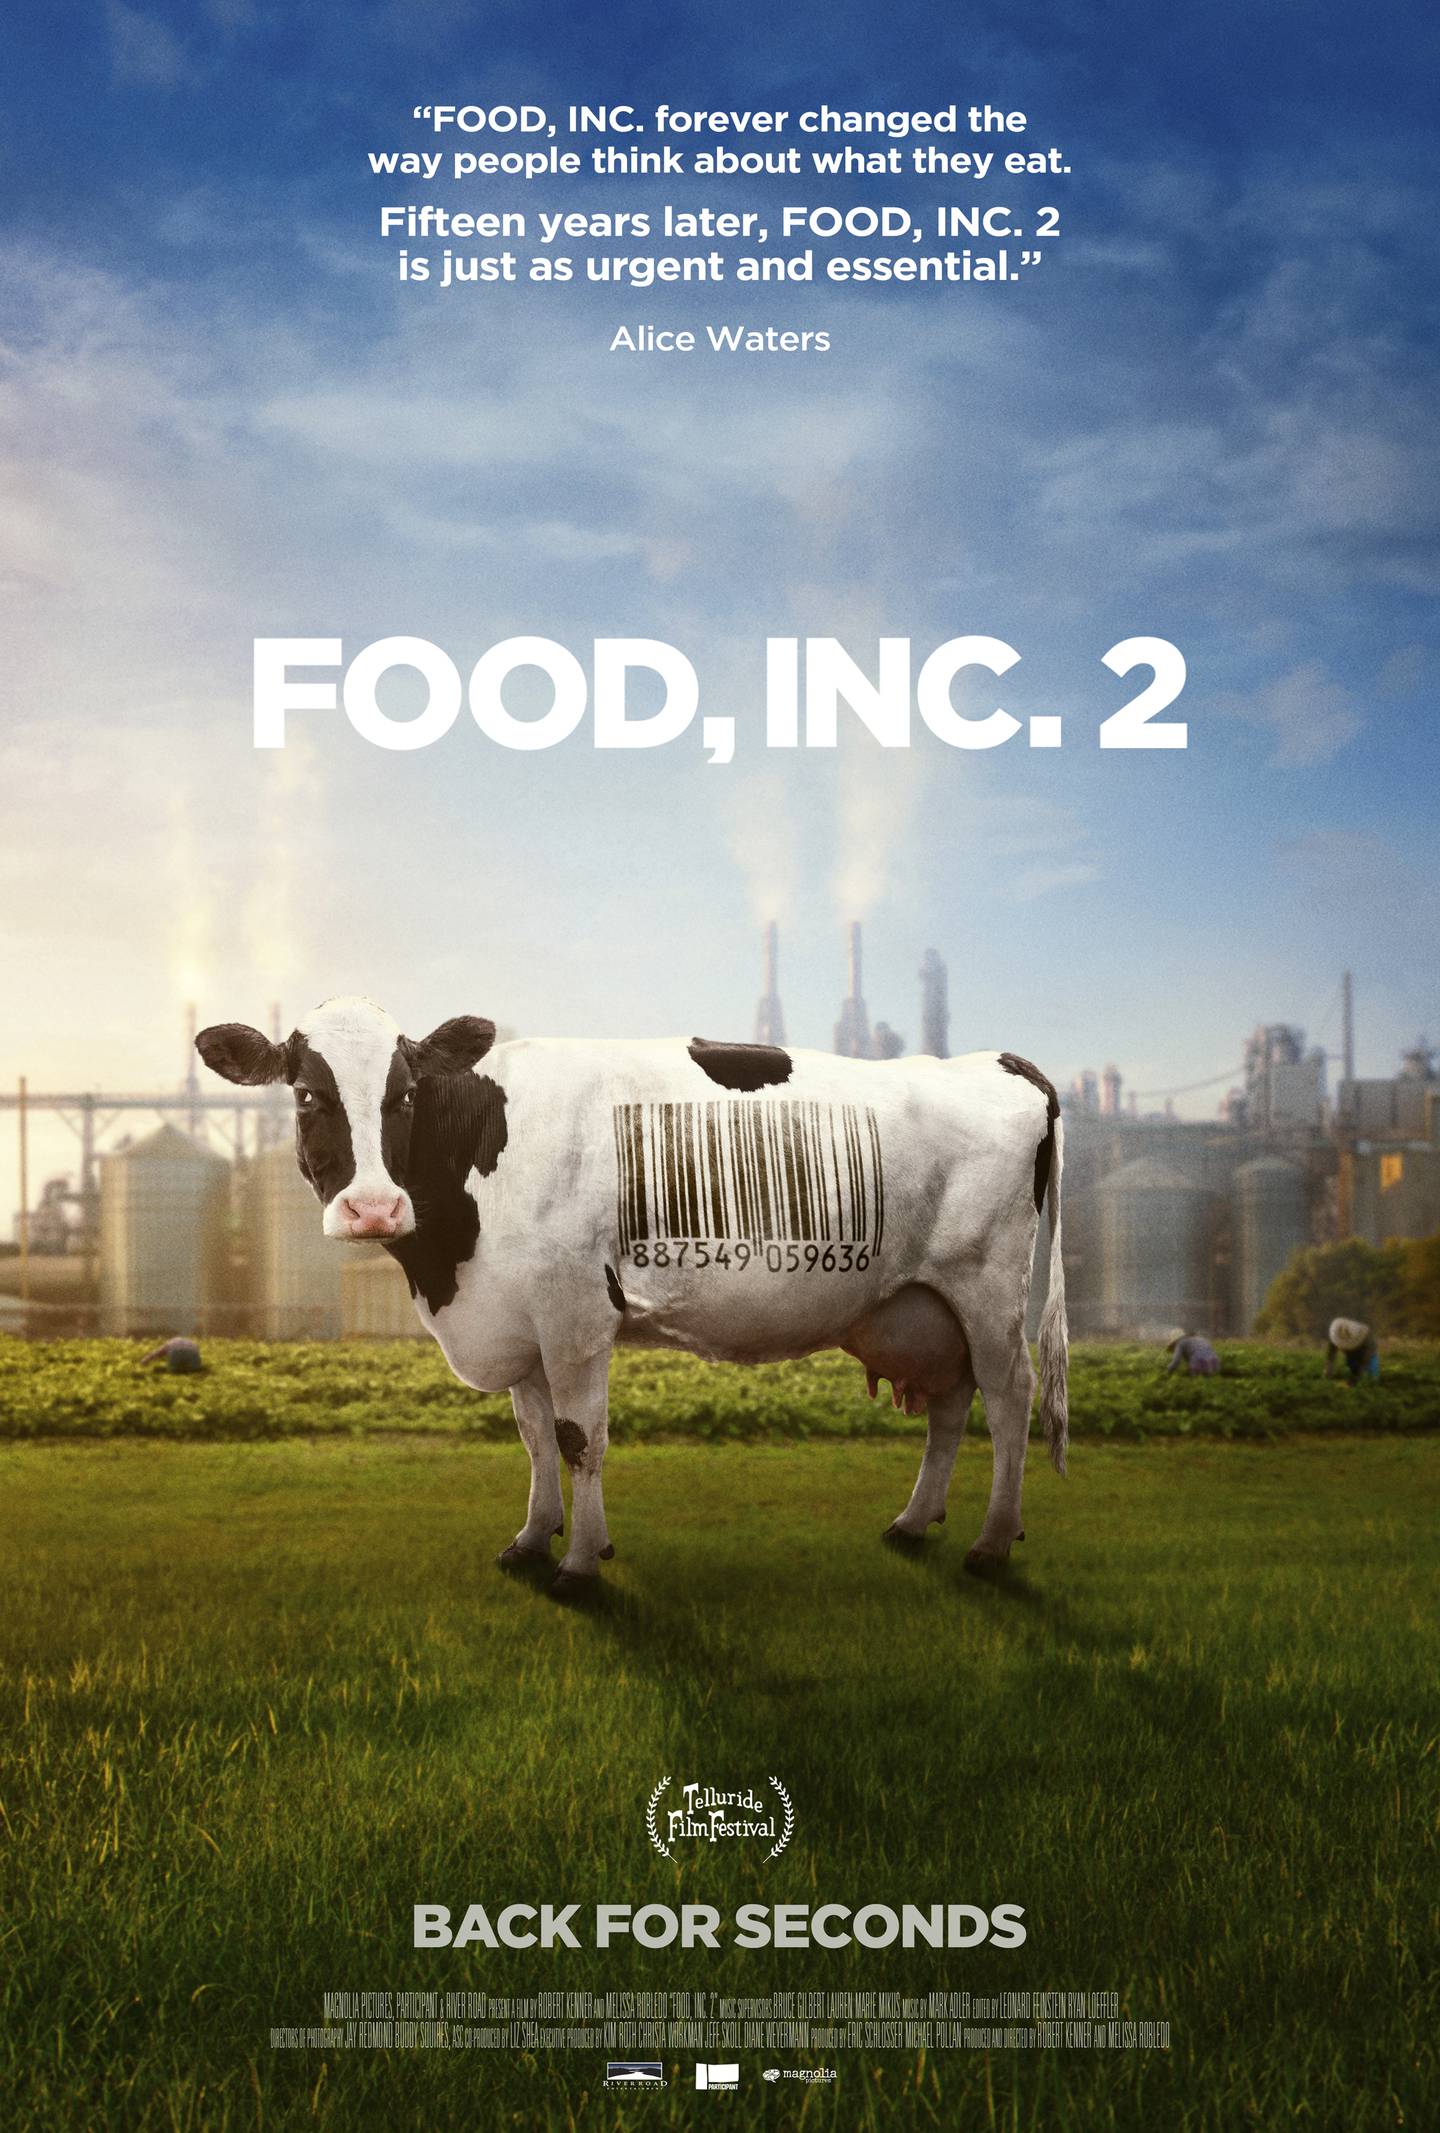 This image released by Magnolia Pictures shows promotional art for the documentary “Food, Inc. 2.”